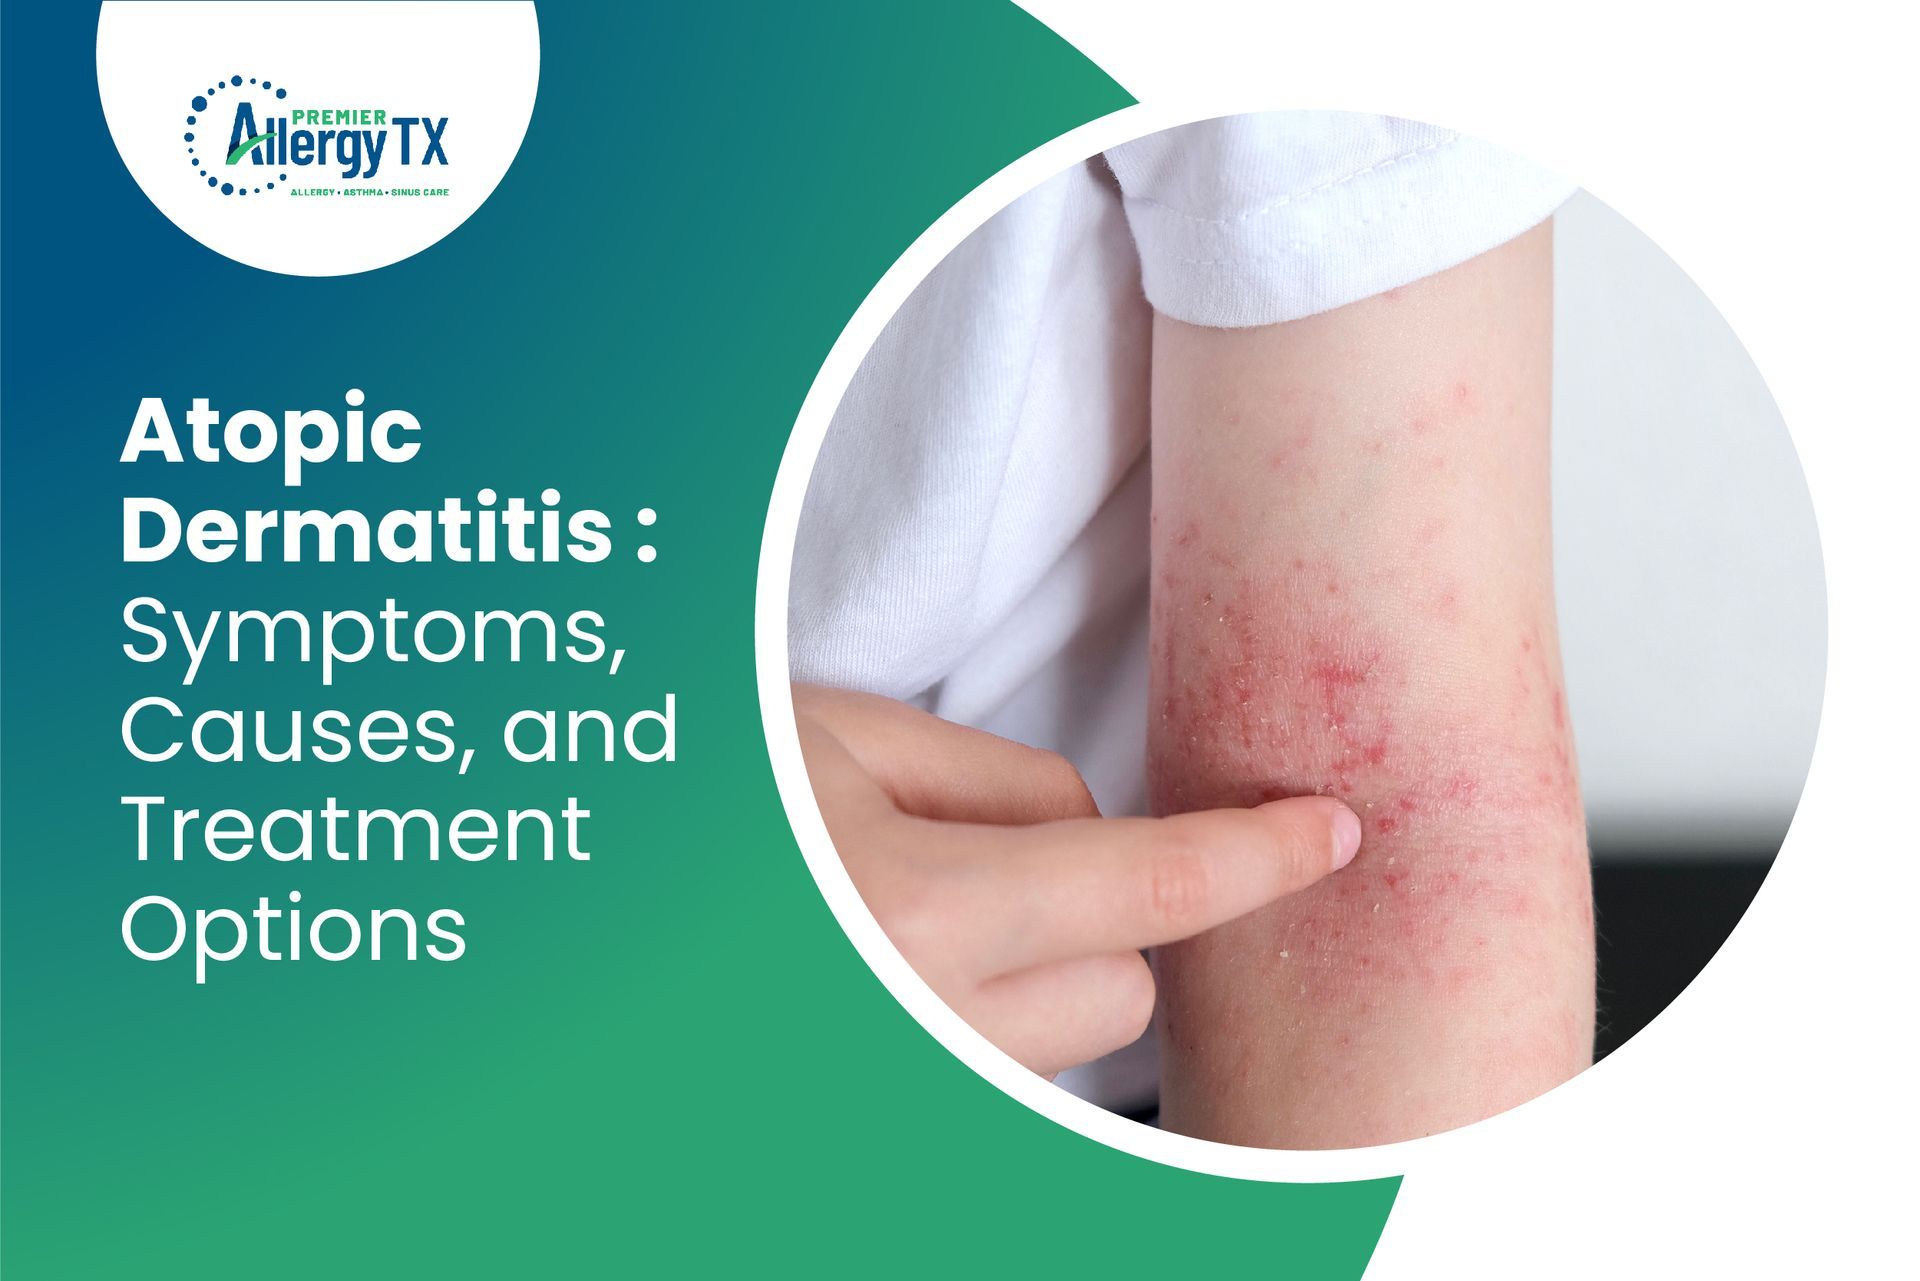 Symptoms, Causes, and Treatment Options for Atopic Dermatitis